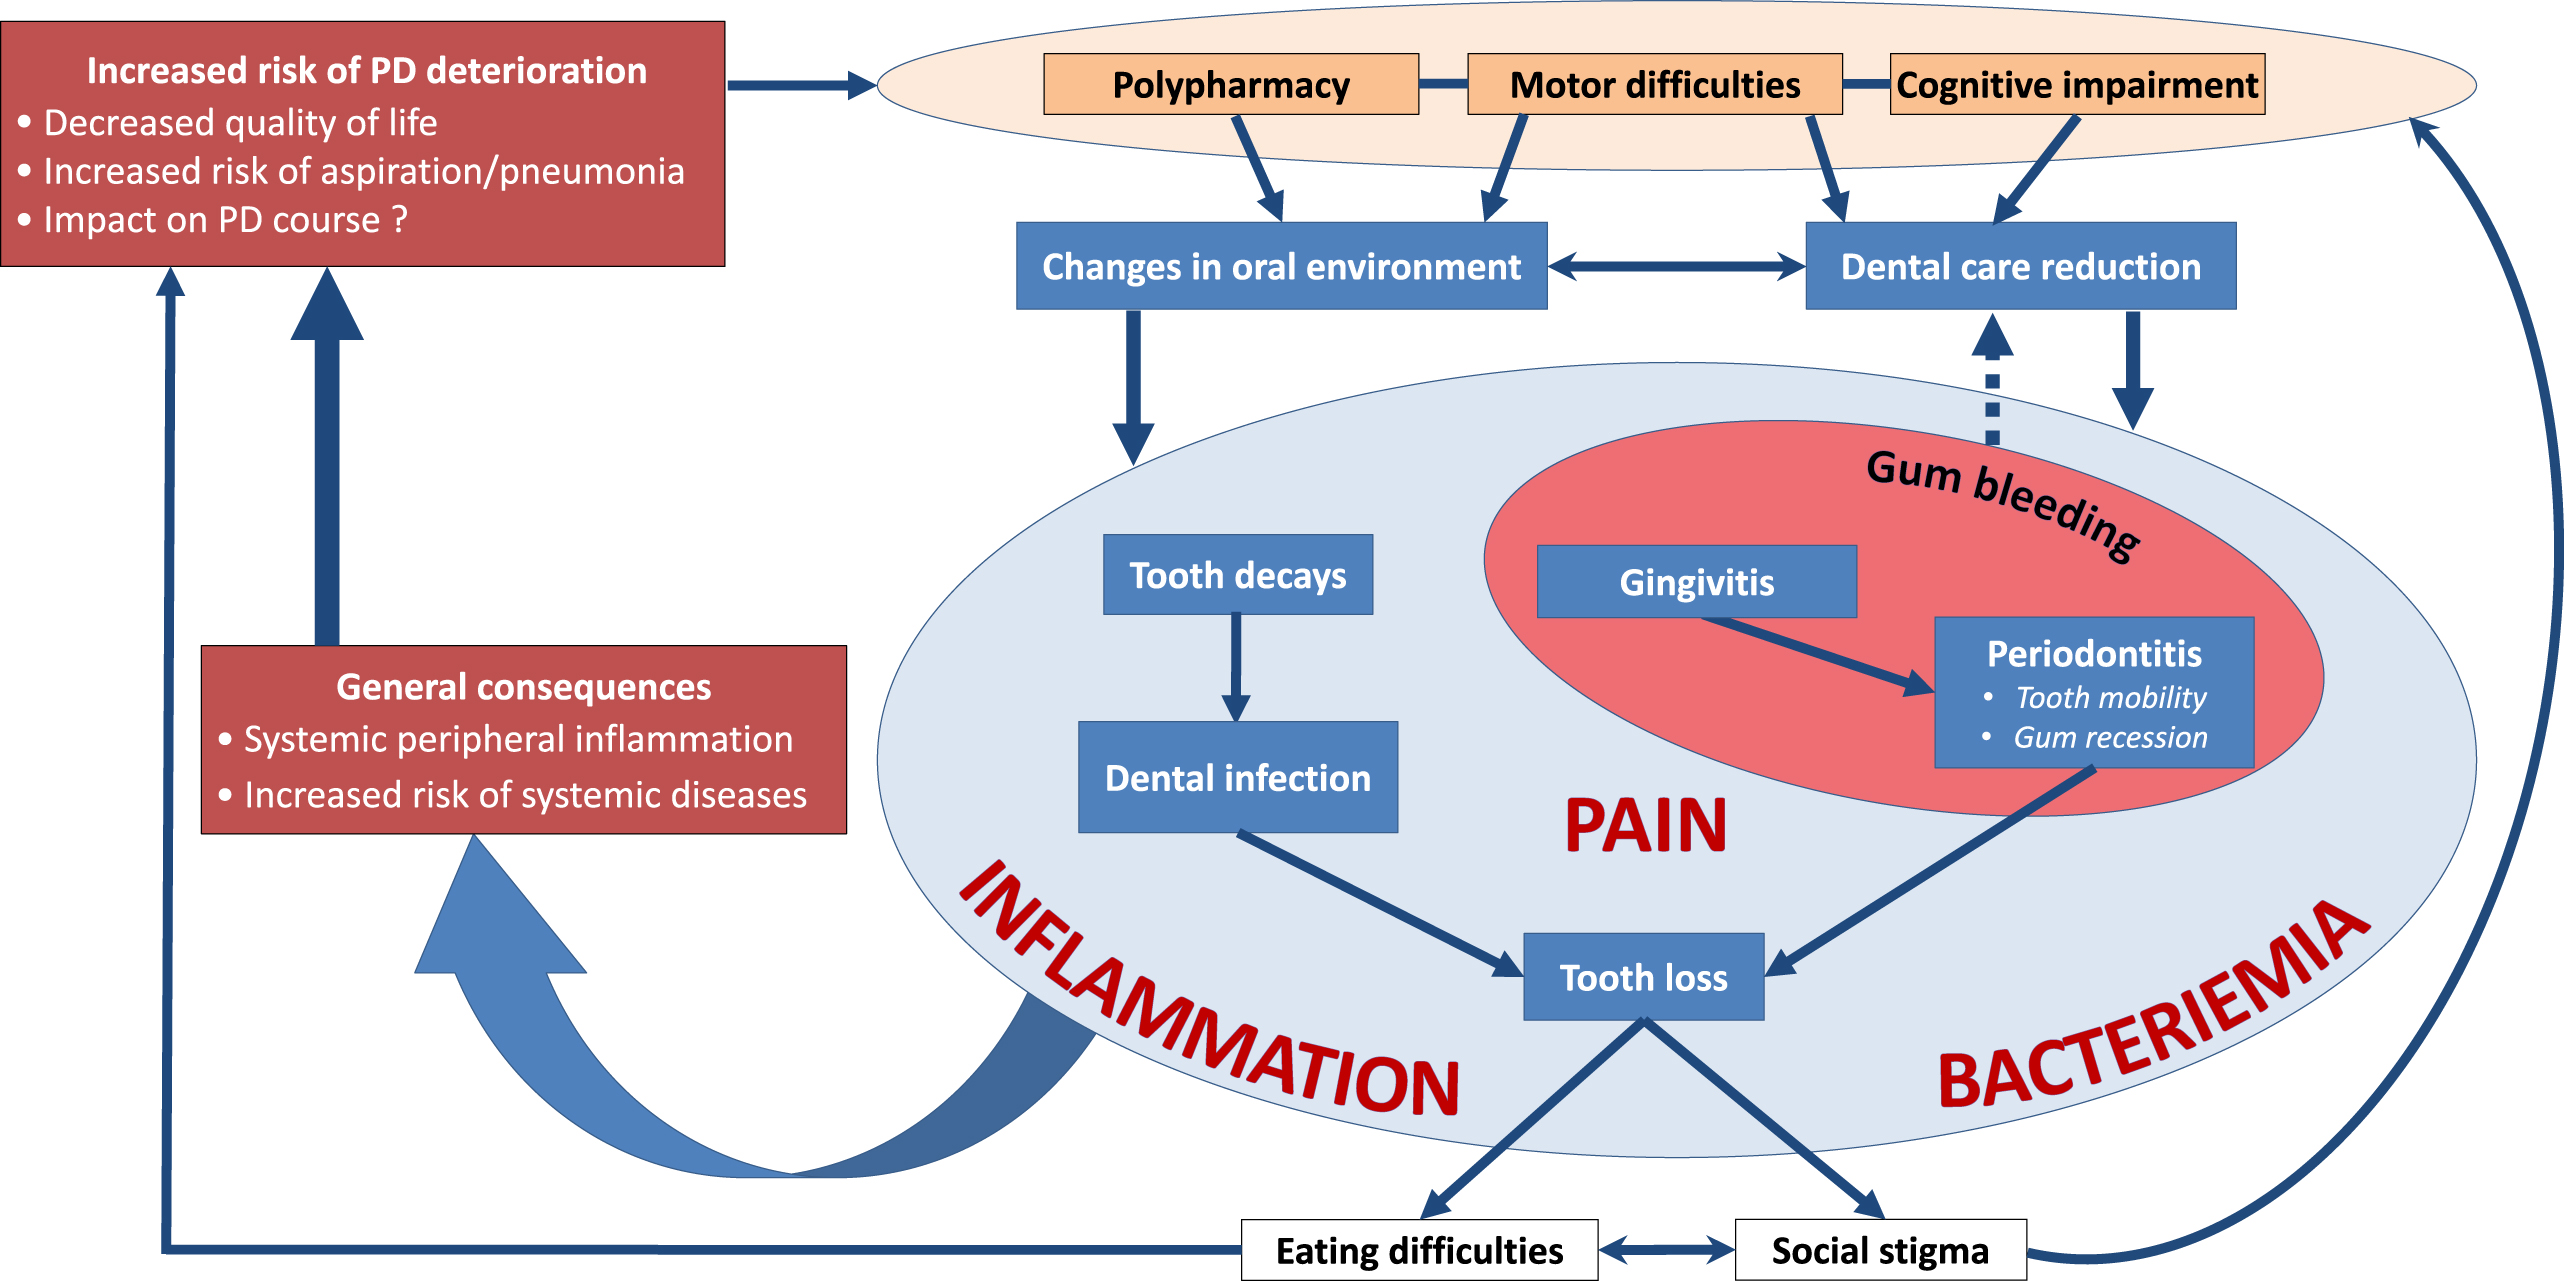 More than meets the eye: Consequences of oral health disorders in Parkinson’s disease.